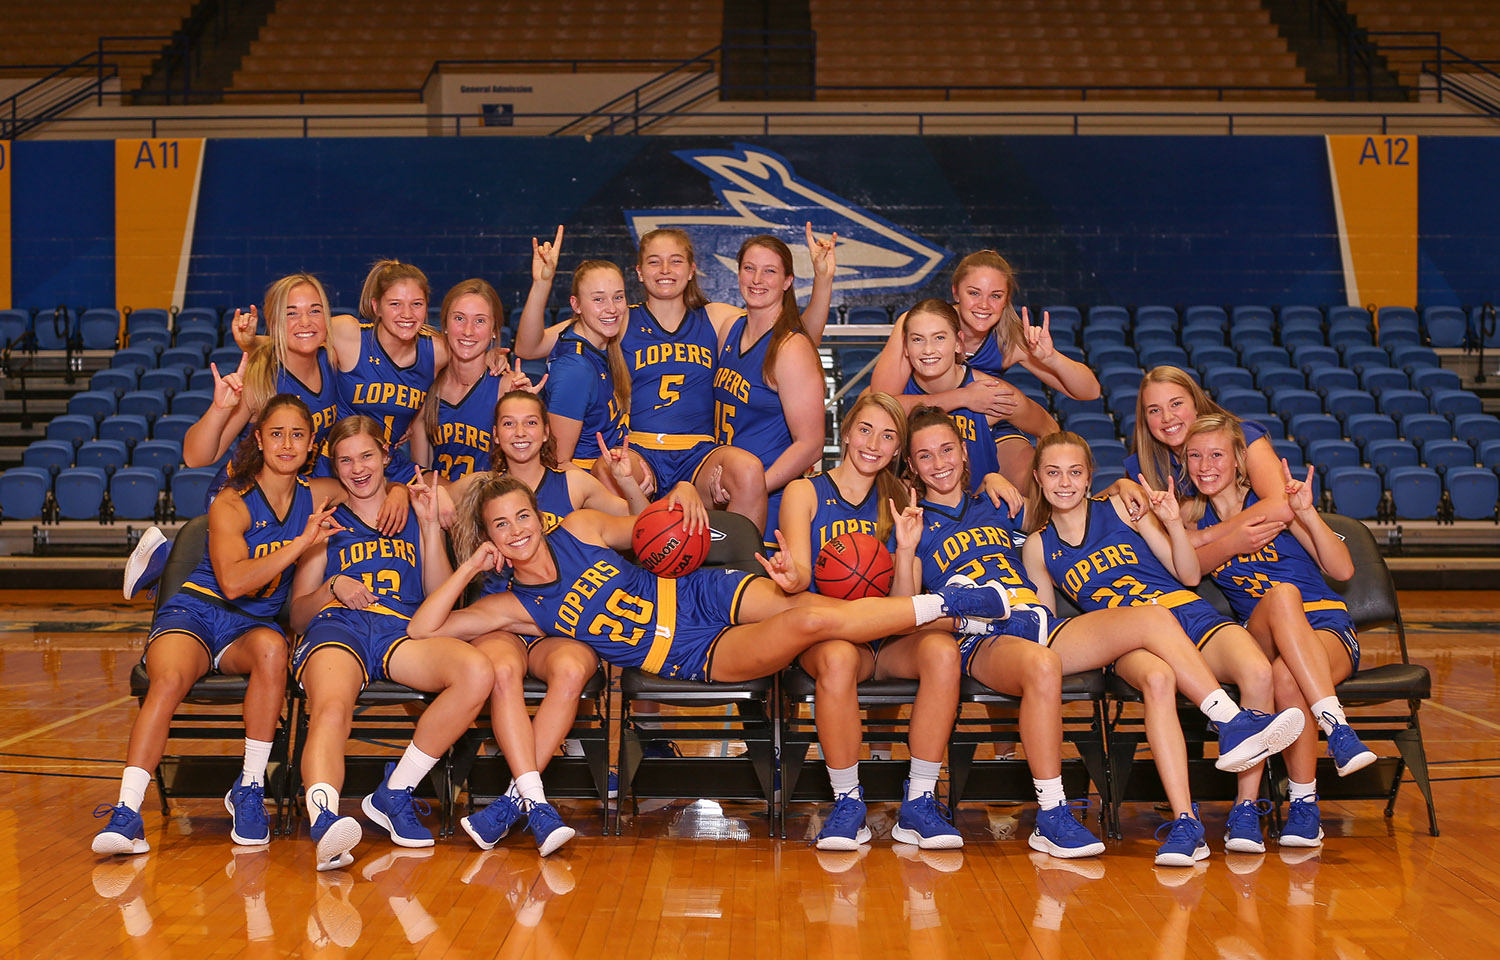 The UNK women’s basketball team knows when to be serious, and they also know how to let loose. (Photo by Corbey R. Dorsey, UNK Athletics)